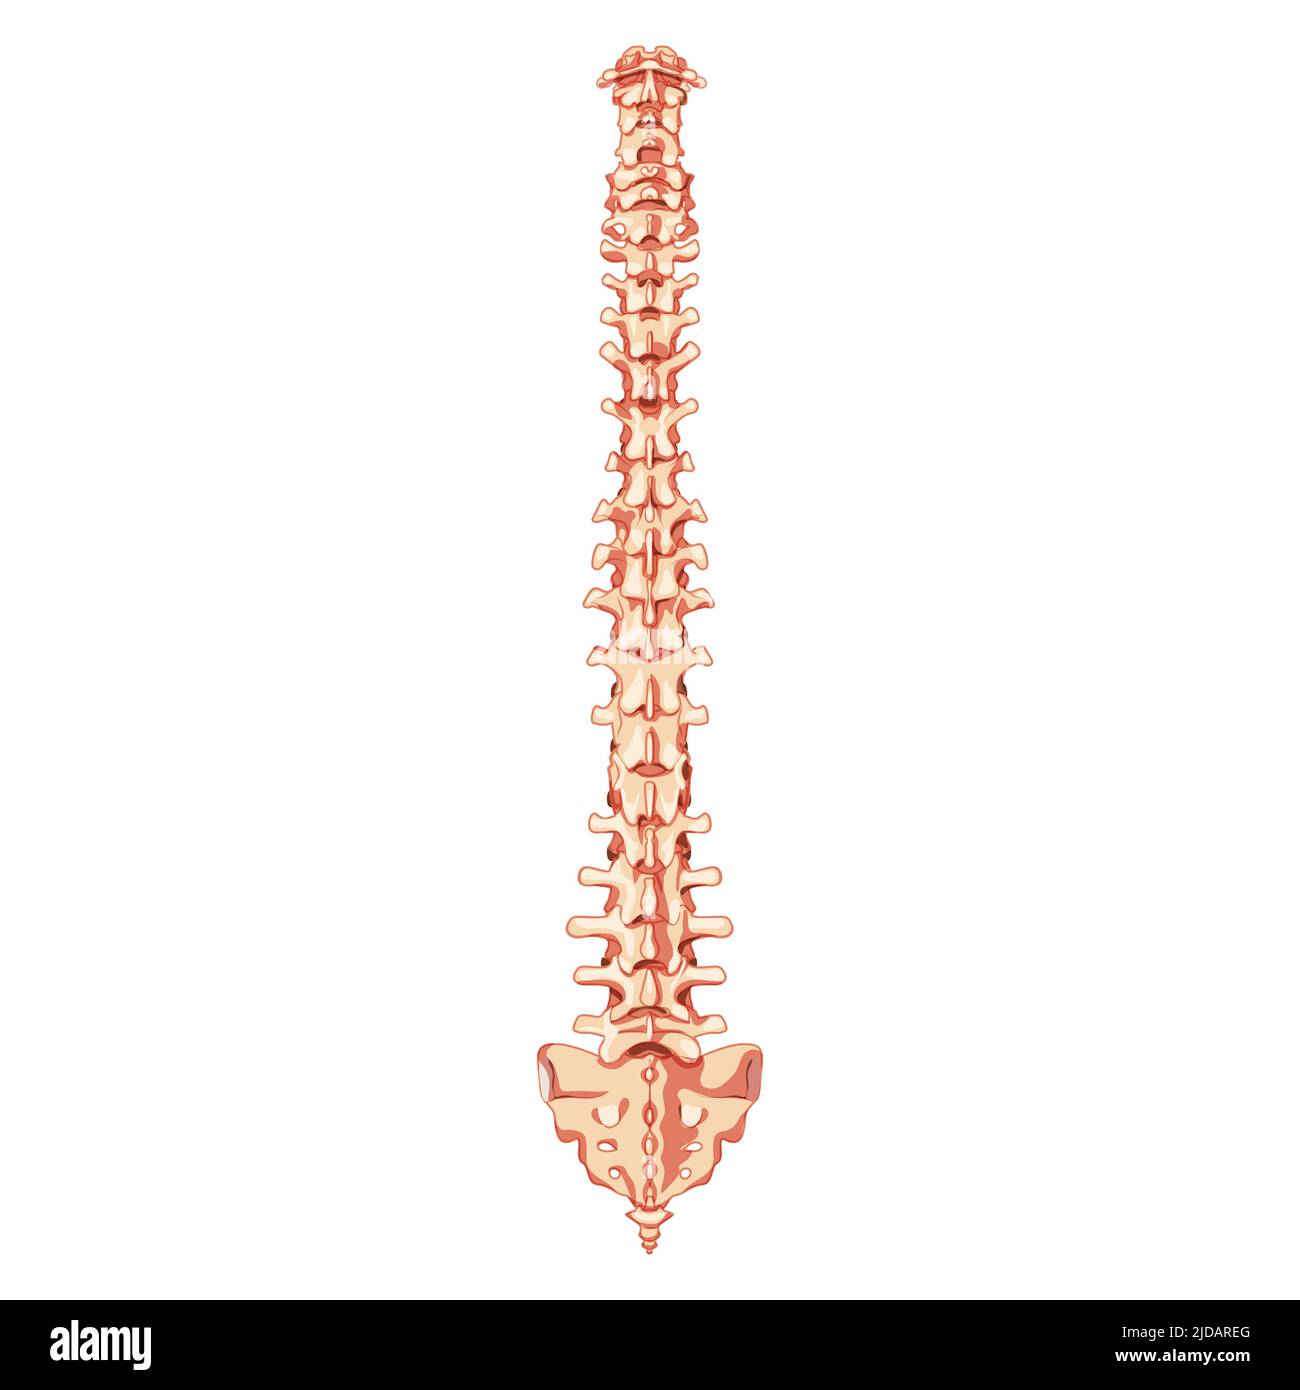 The human vertebral column spine anatomy back Posterior dorsal view with Intervertebral disc. Vector flat realistic concept illustration in natural colors, spine isolated on white background. Stock Vector